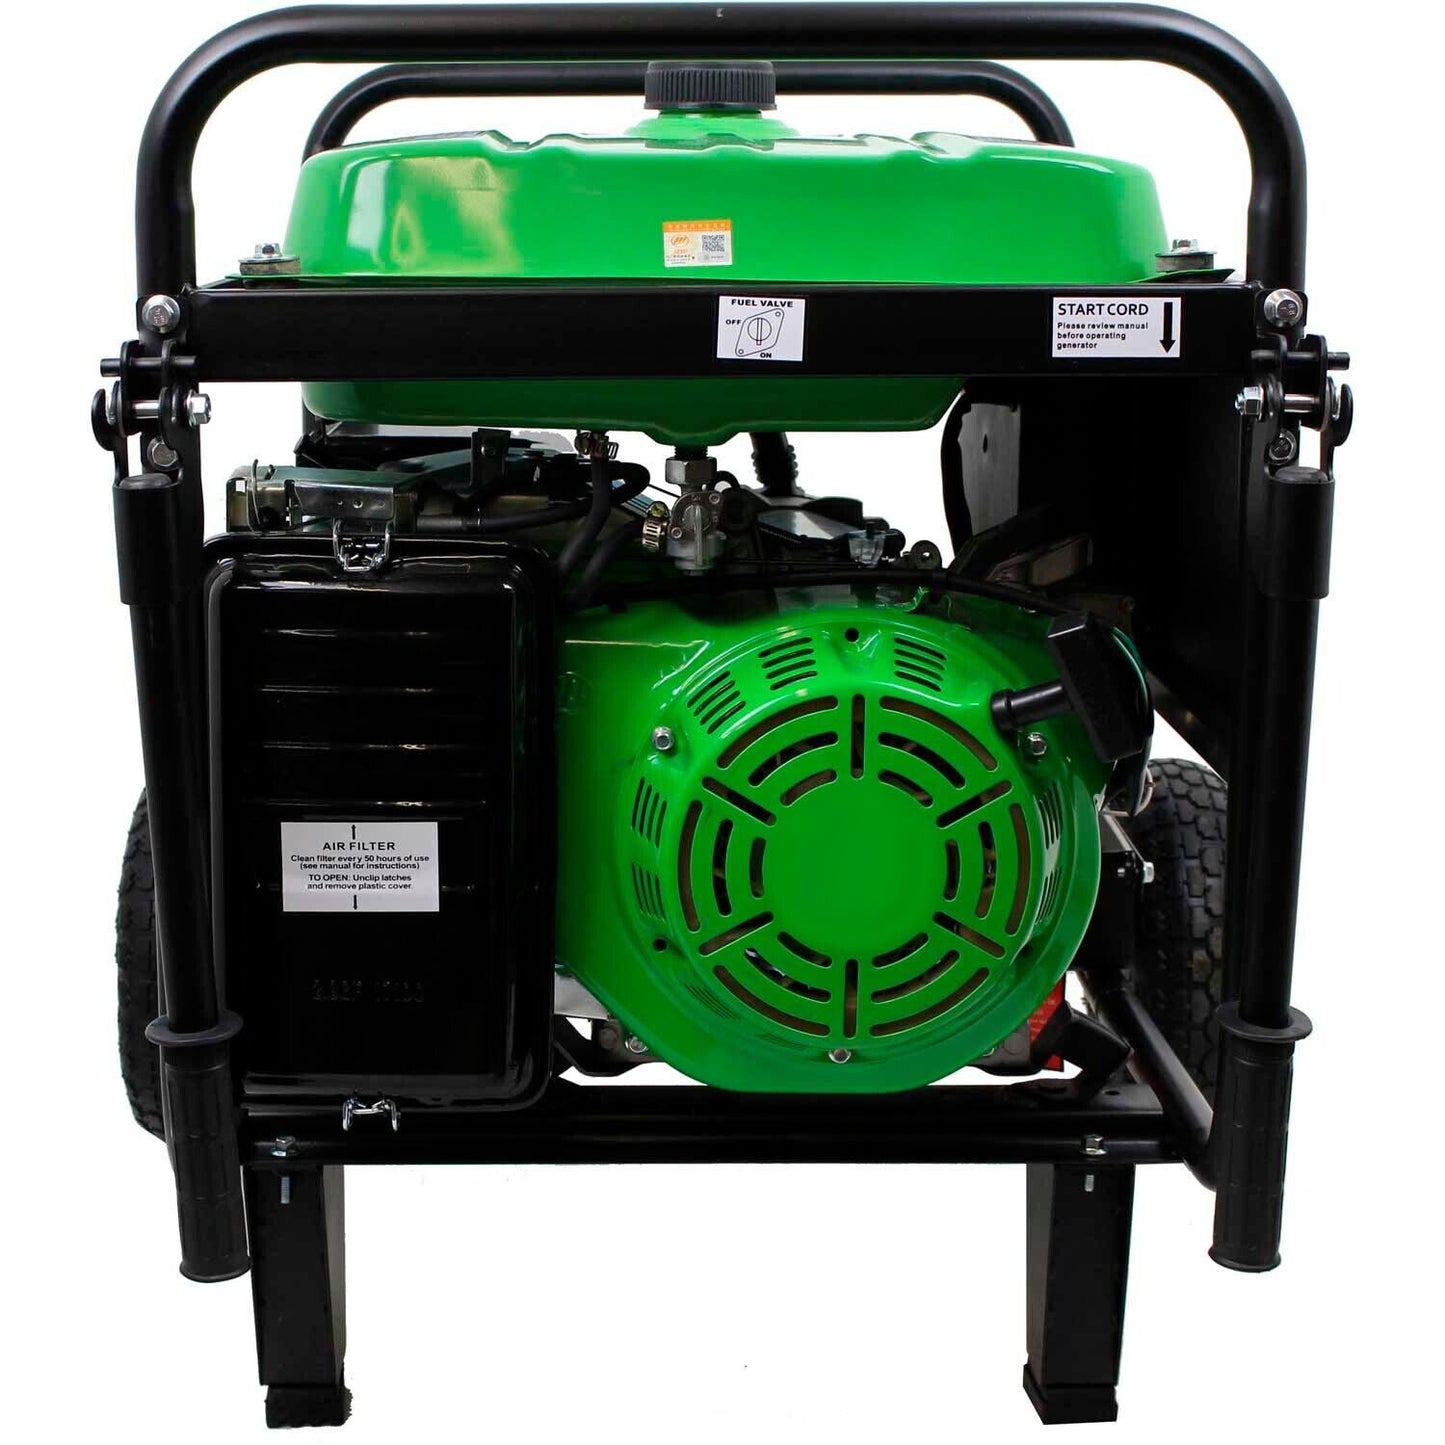 Portable Generator - 7.5 kW - Gas - Electric/Recoil - 120/240 Volts - 6.5 tank